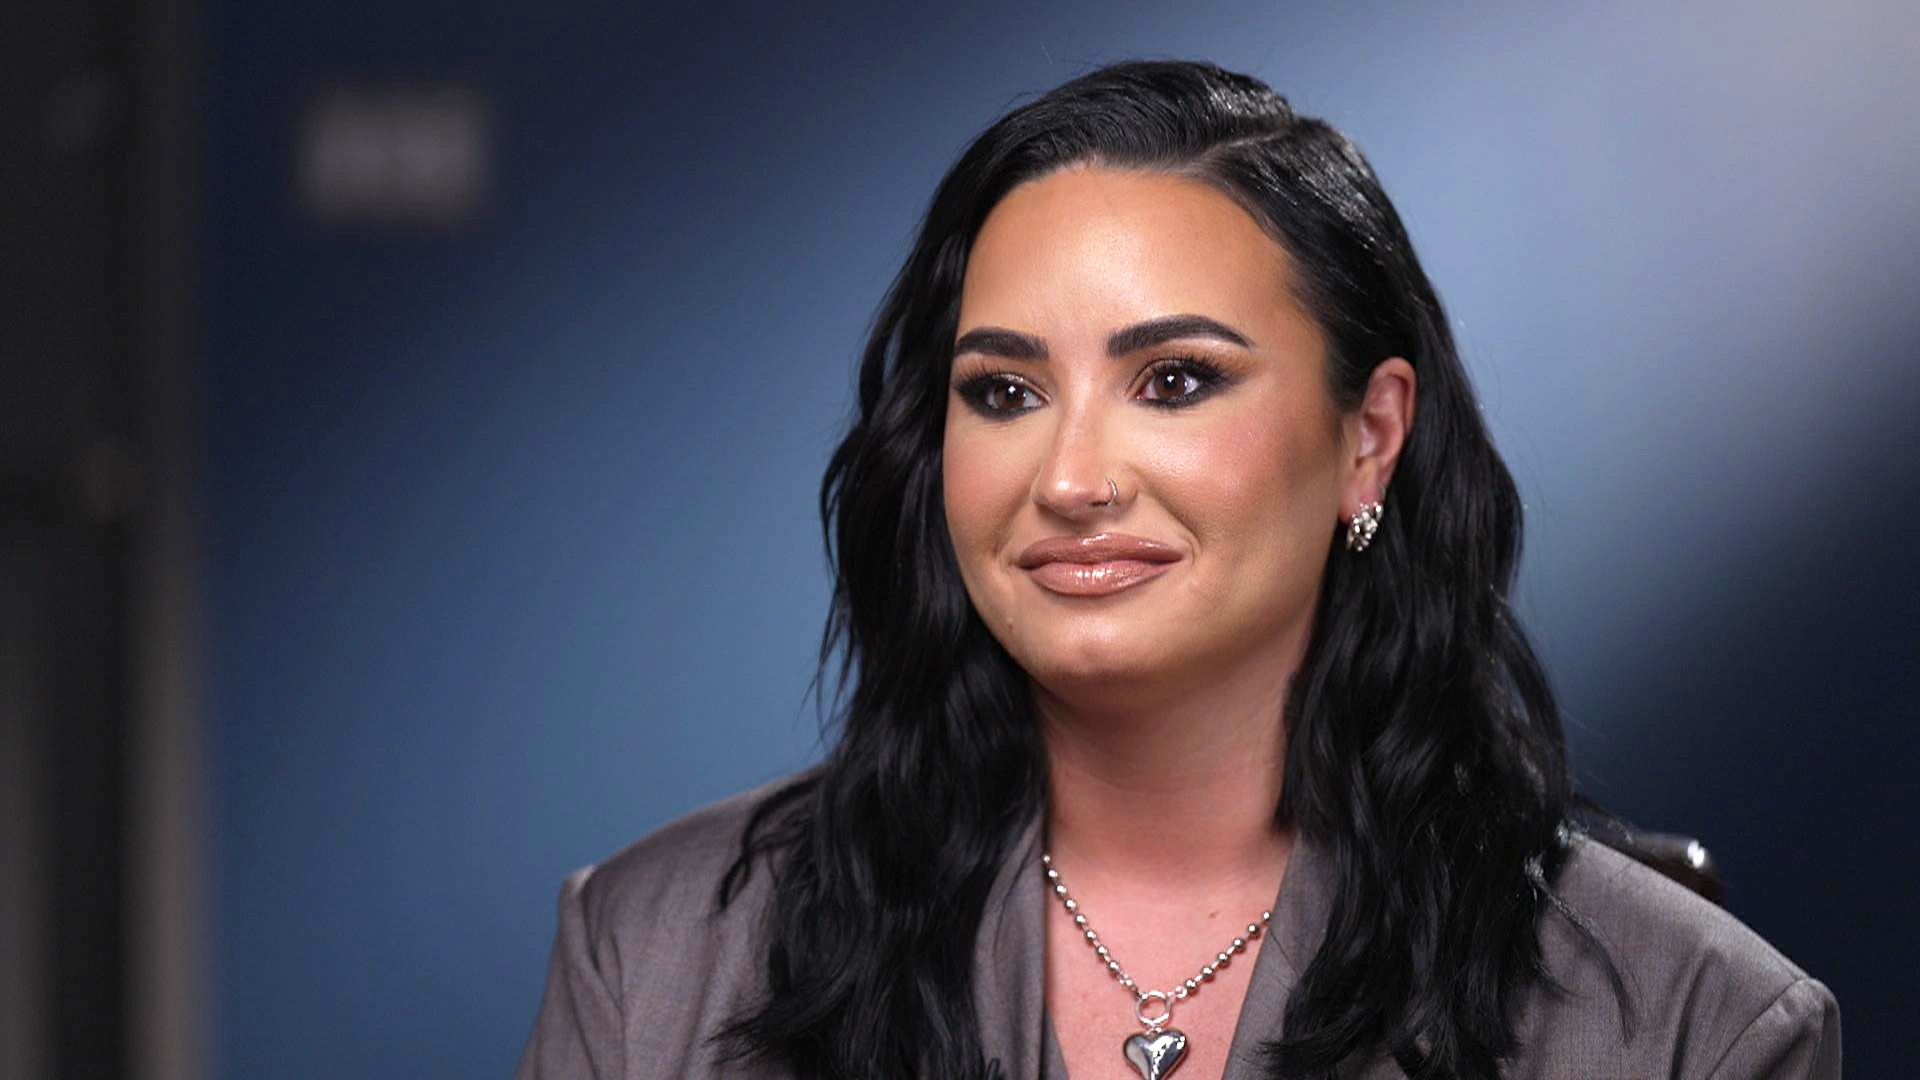 Demi Lovato opens up about her engagement, health journey